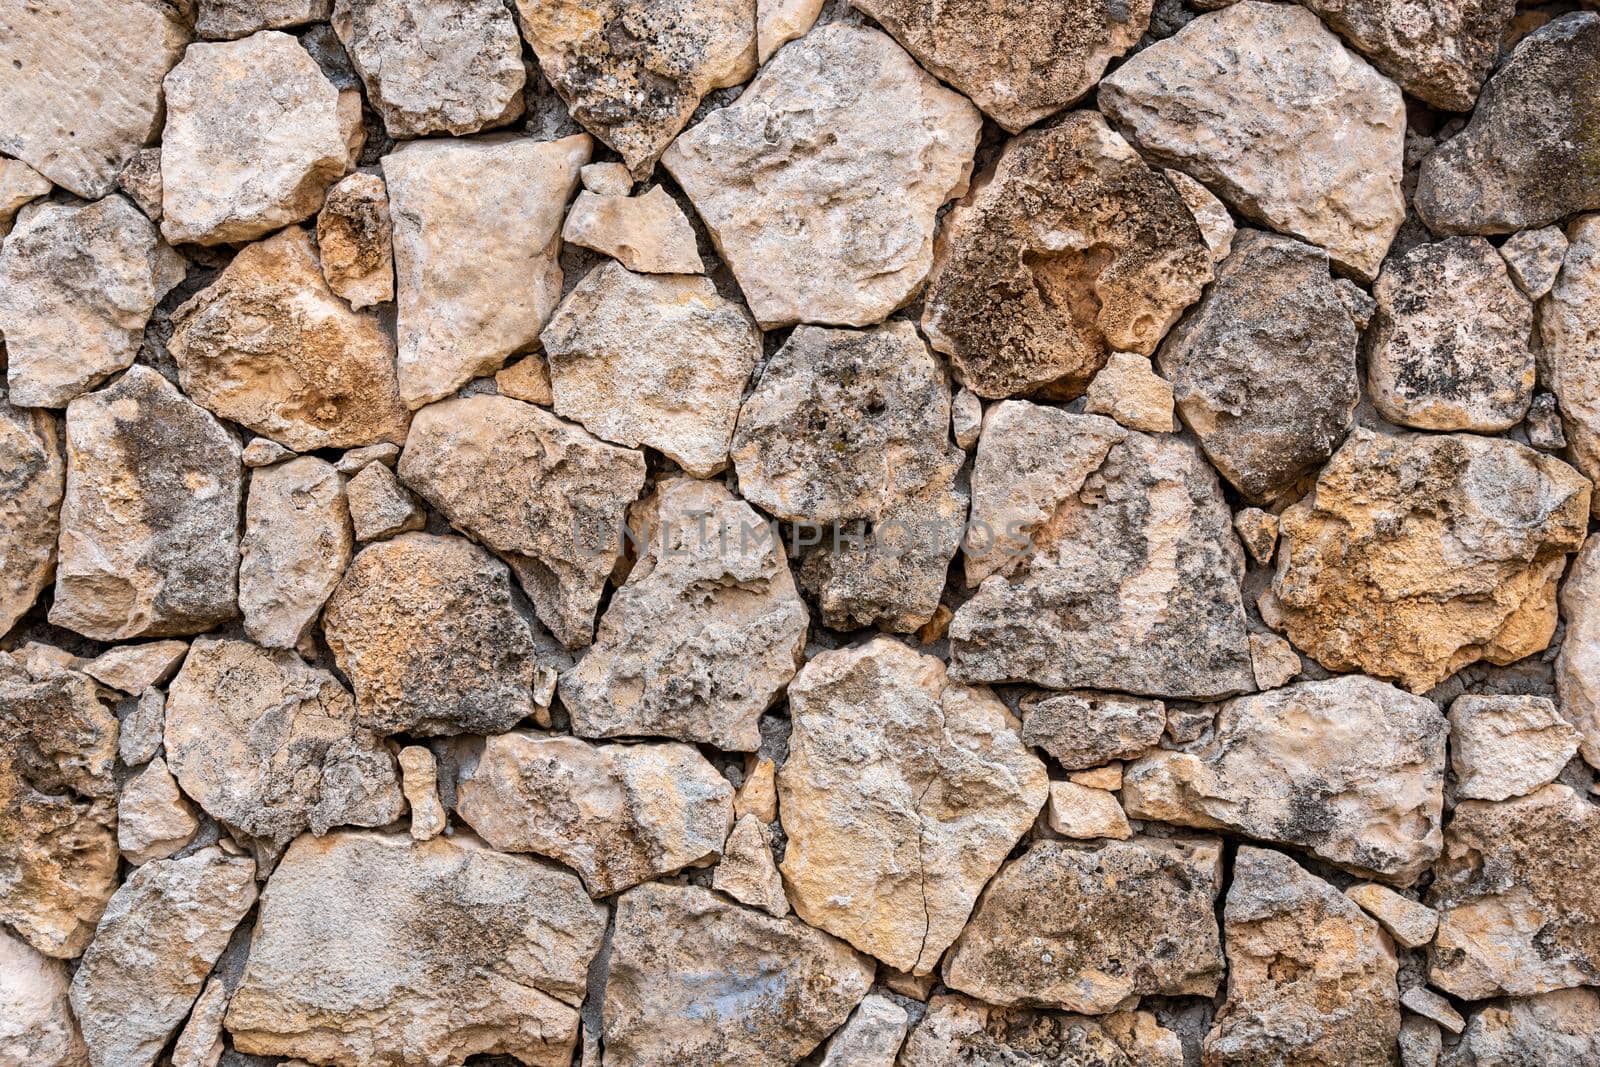 Background of limestone masonry. The surface is decorated with natural material. The wall is made of wild stone.